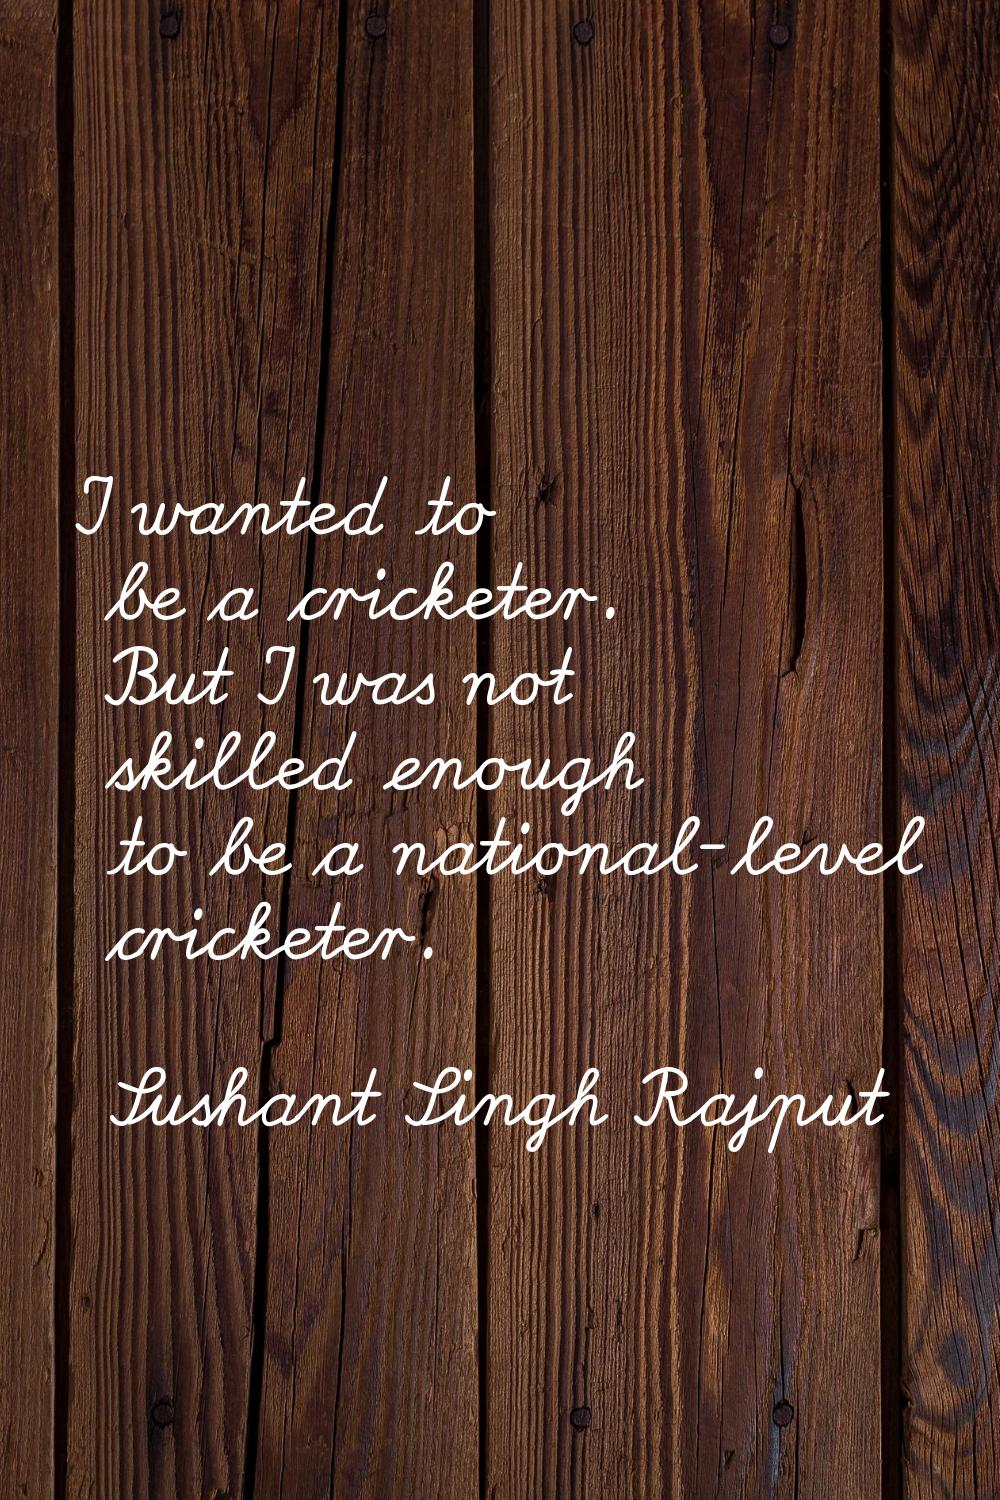 I wanted to be a cricketer. But I was not skilled enough to be a national-level cricketer.